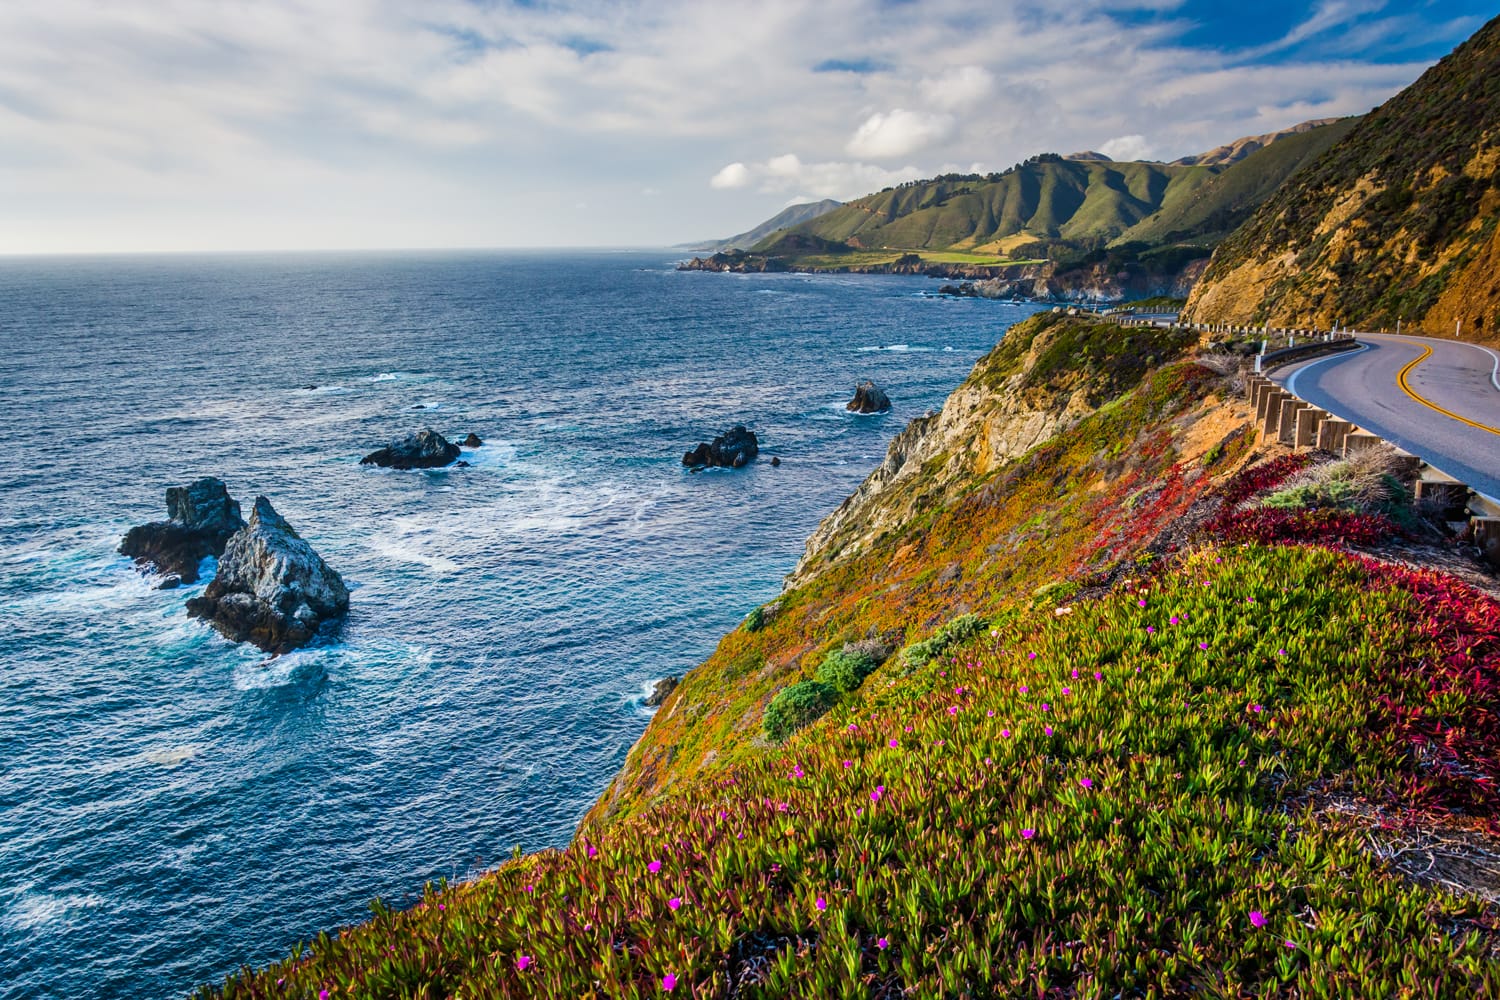 View of the Pacific Ocean and Pacific Coast Highway in Big Sur, California.